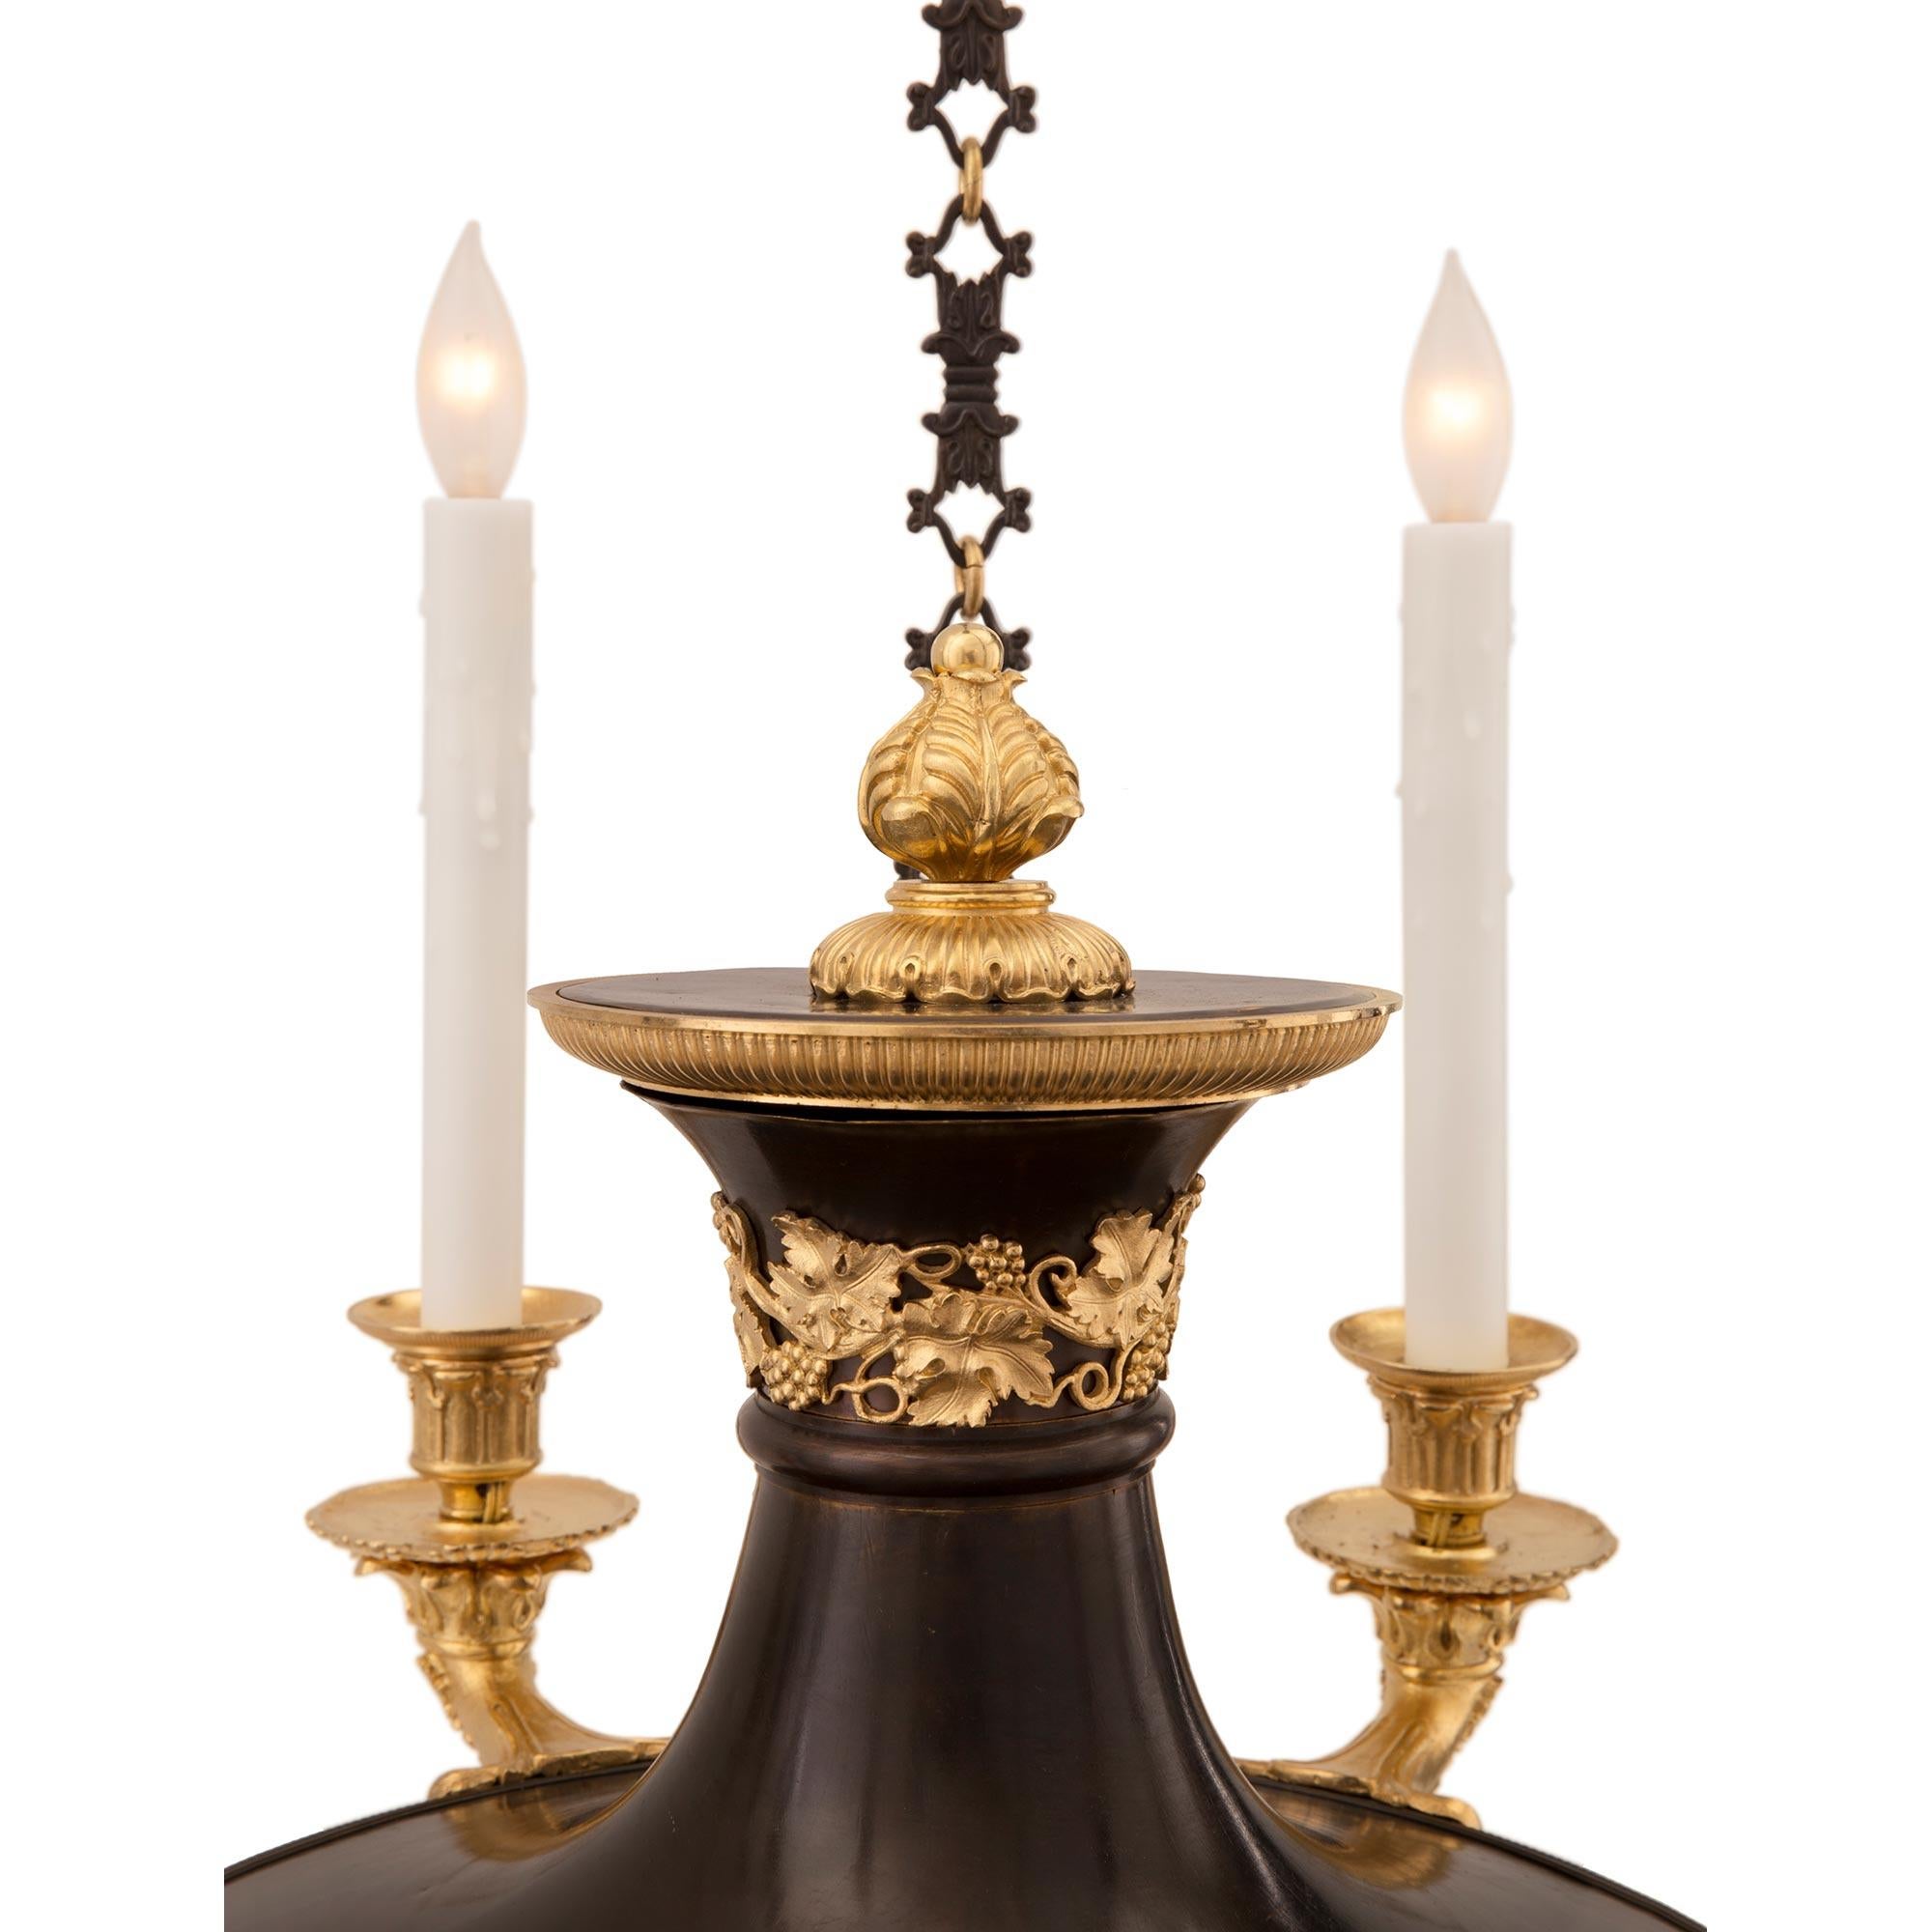 French 19th Century Empire Style Patinated Bronze and Ormolu Six-Arm Chandelier For Sale 1